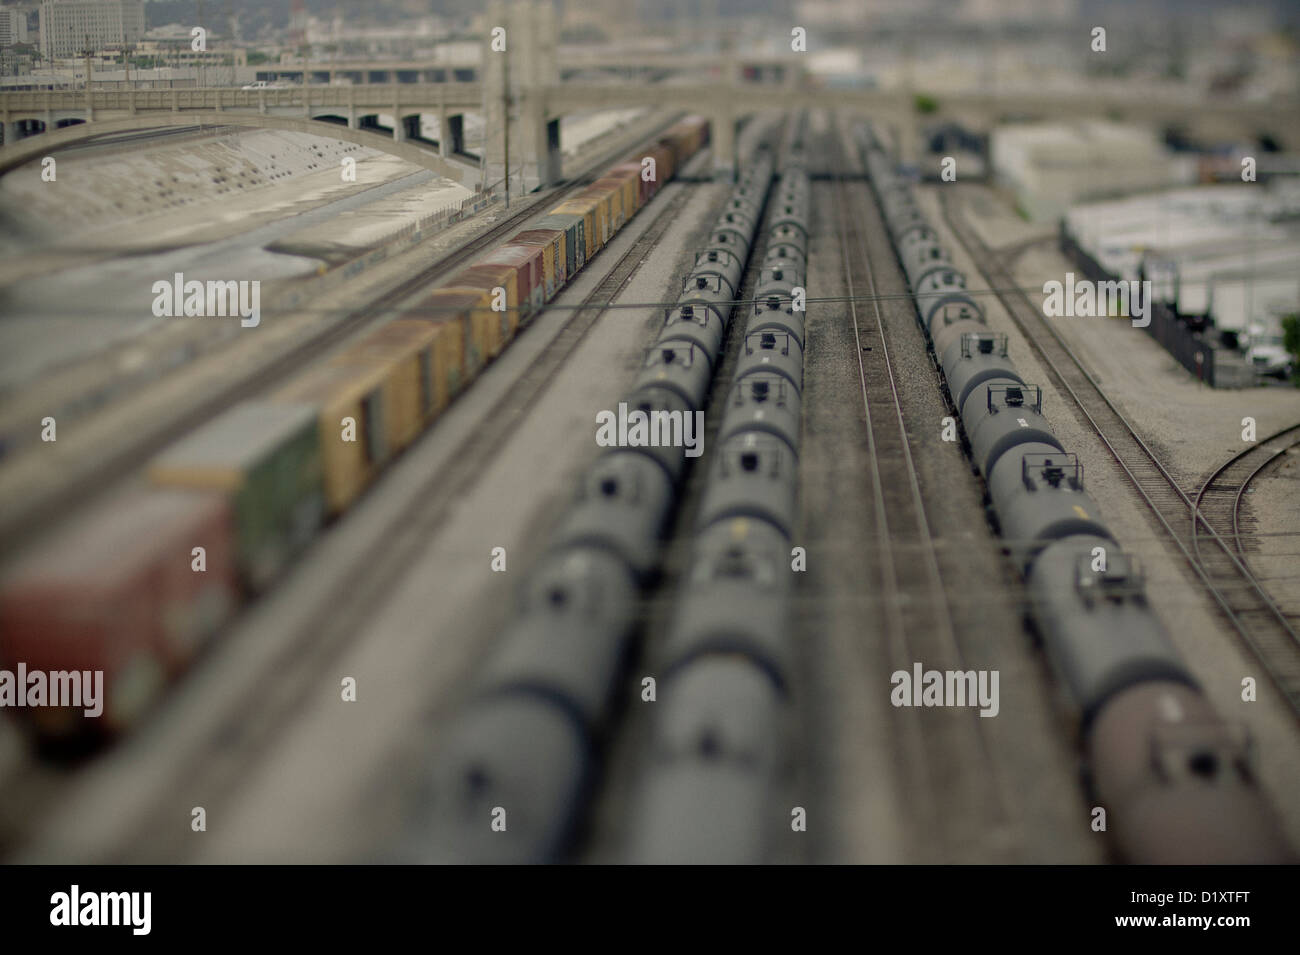 Cargo and containers stationery on a rail track, by the side of the L.A. River, California, USA Stock Photo